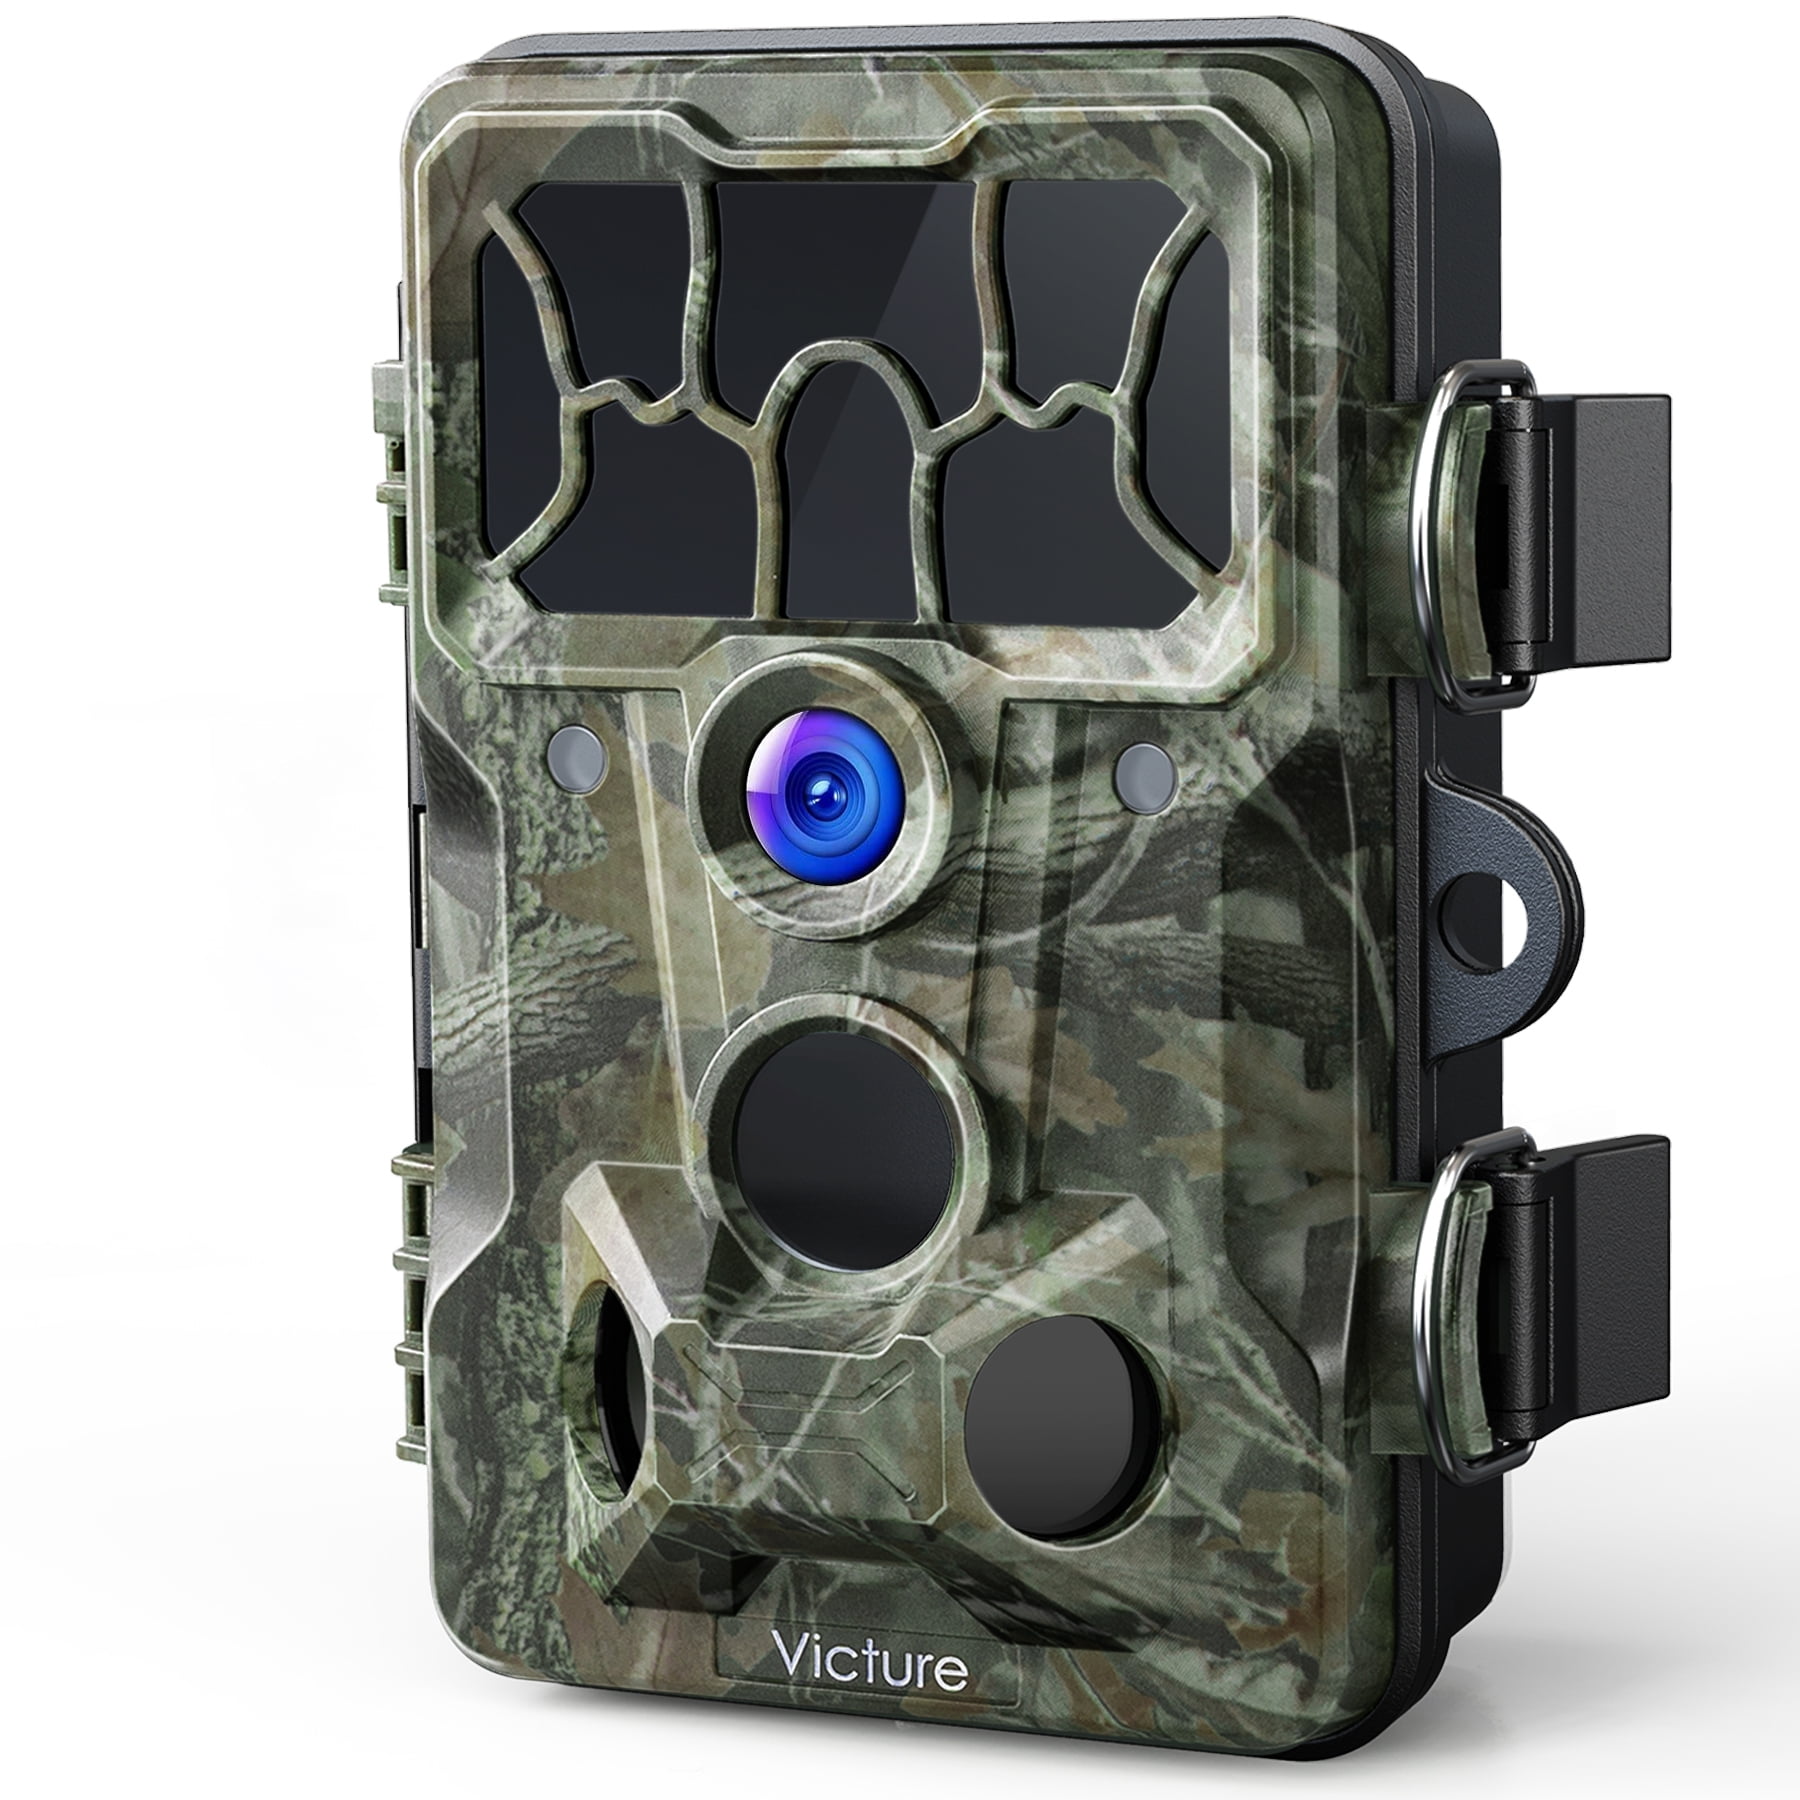 Victure HC200 12MP Trail Game Camera with Night Vision Motion Activated for sale online 